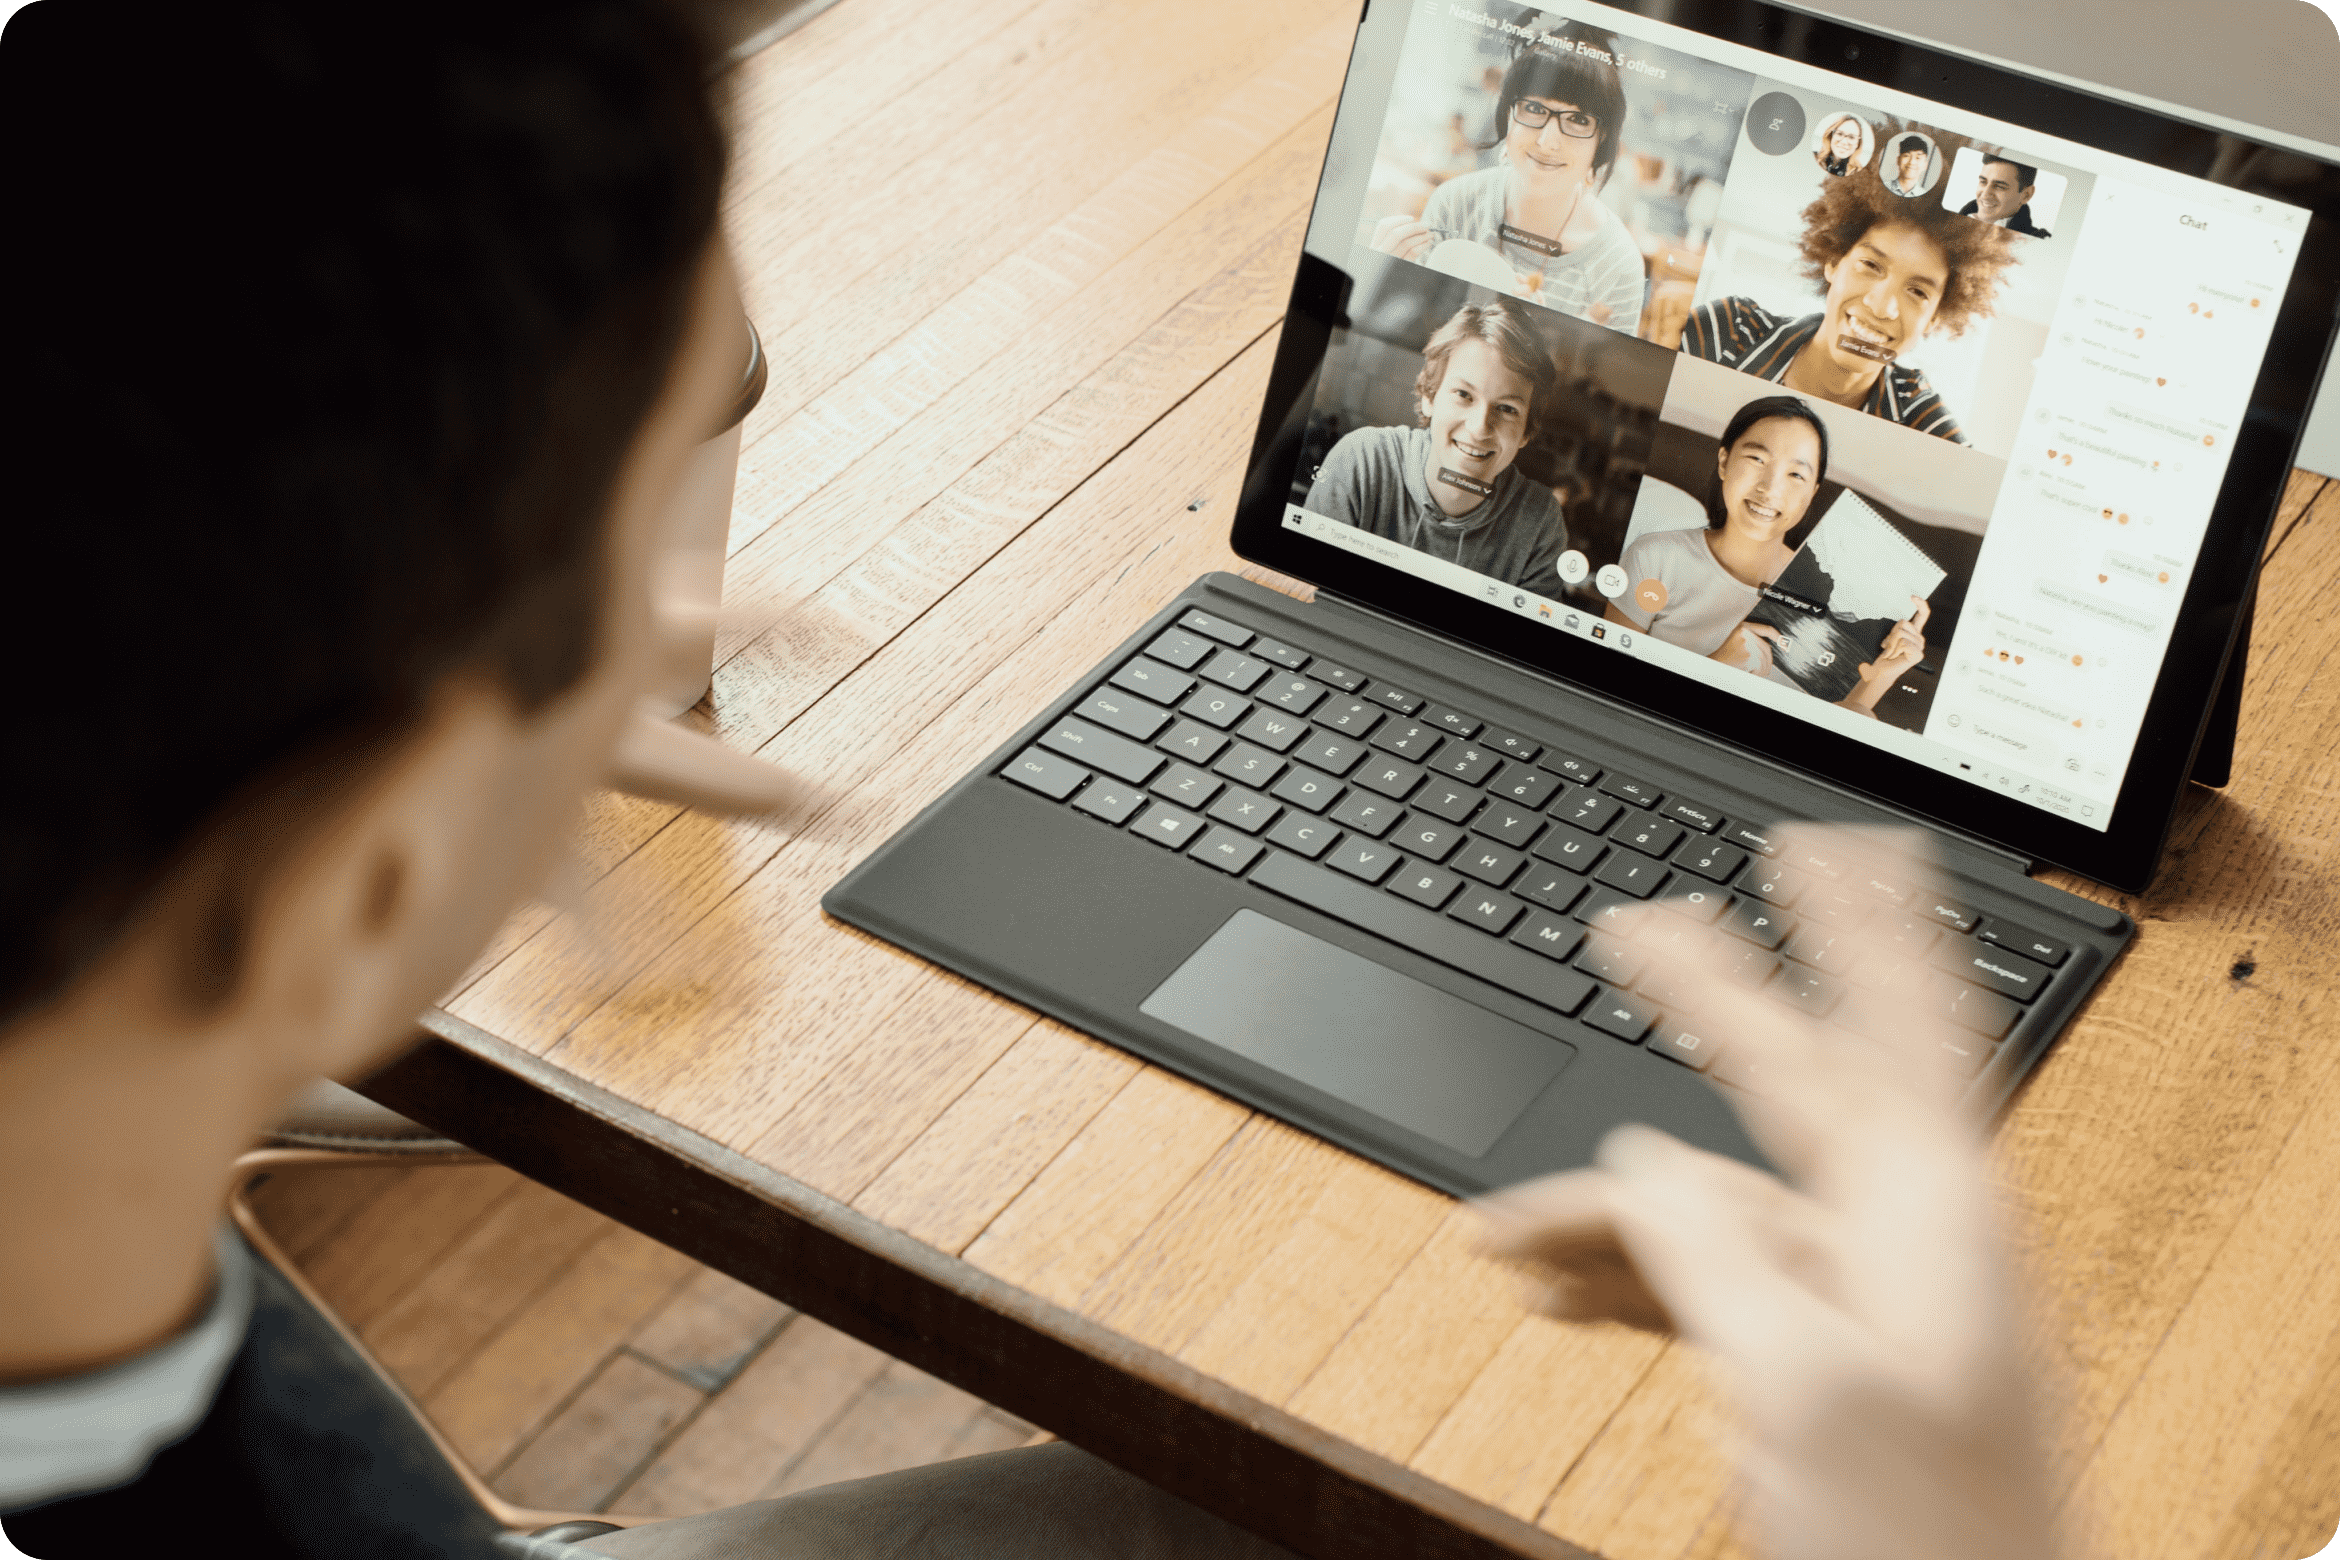 A user collaborates with other smiling faces in a Zoom meeting on a laptop.